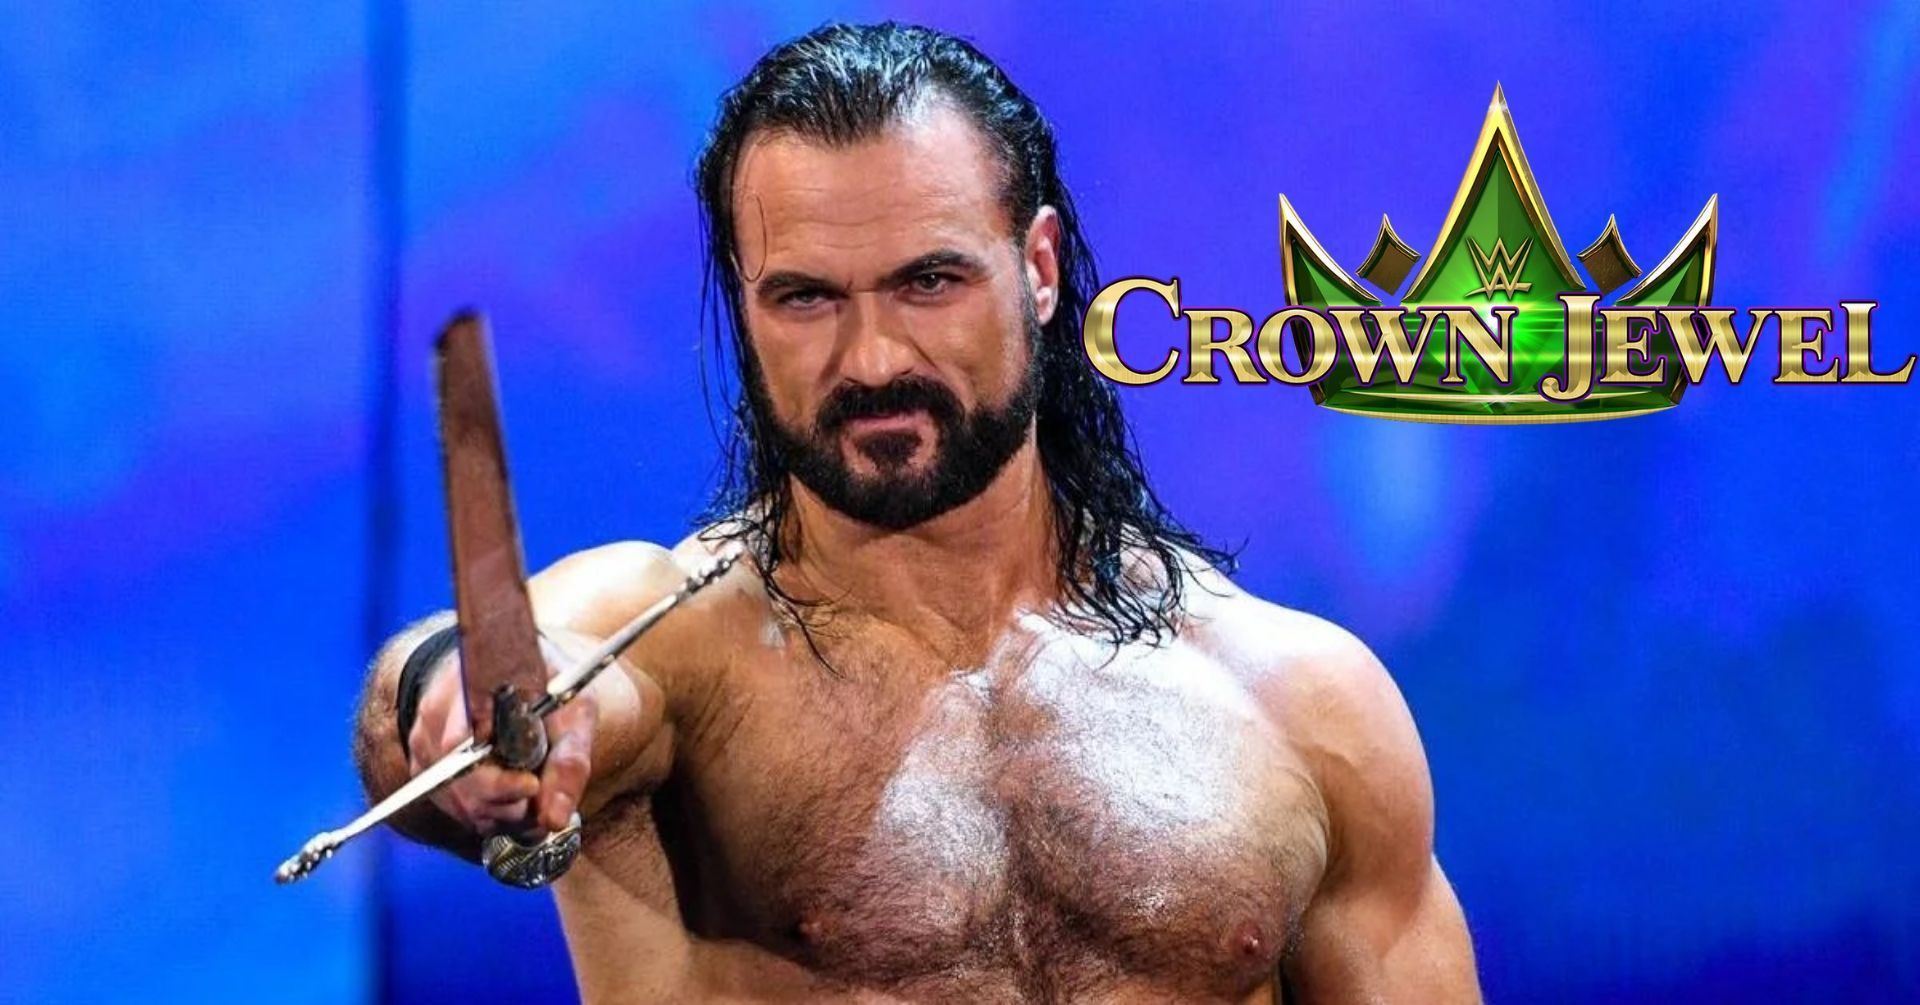 Drew McIntyre is a multi-time WWE Champion.